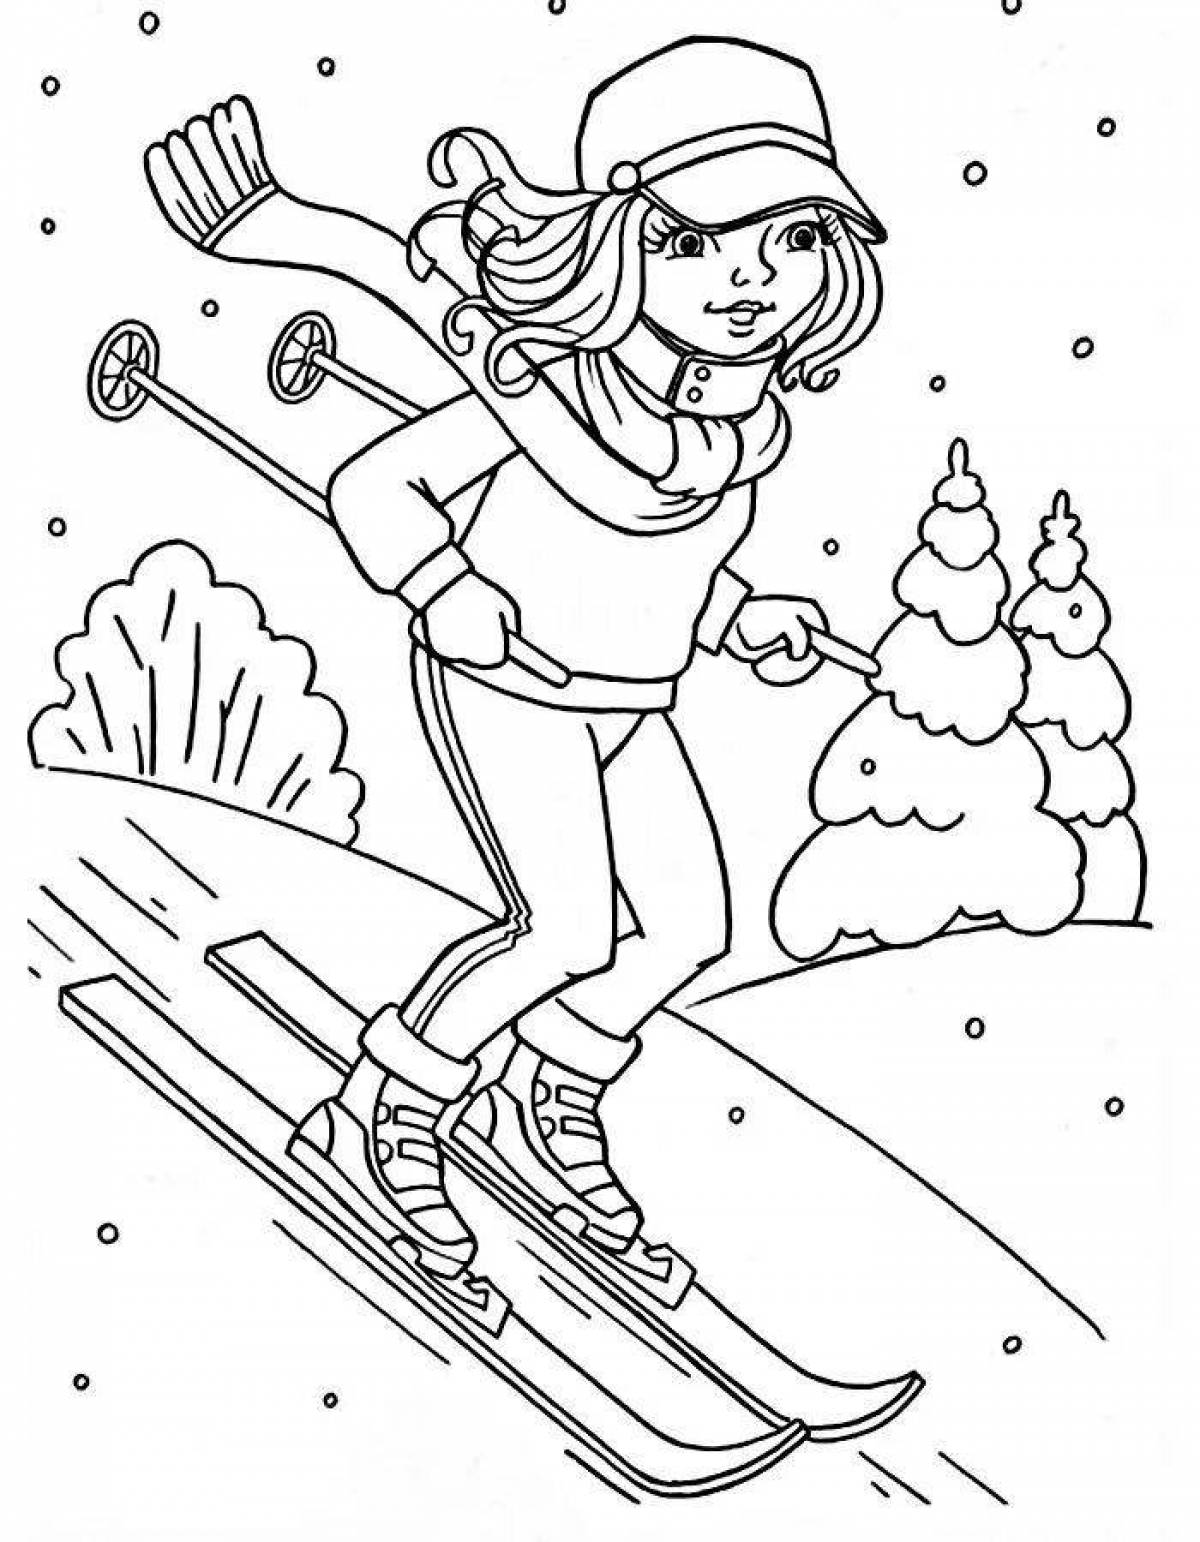 Outstanding sports coloring book for kids